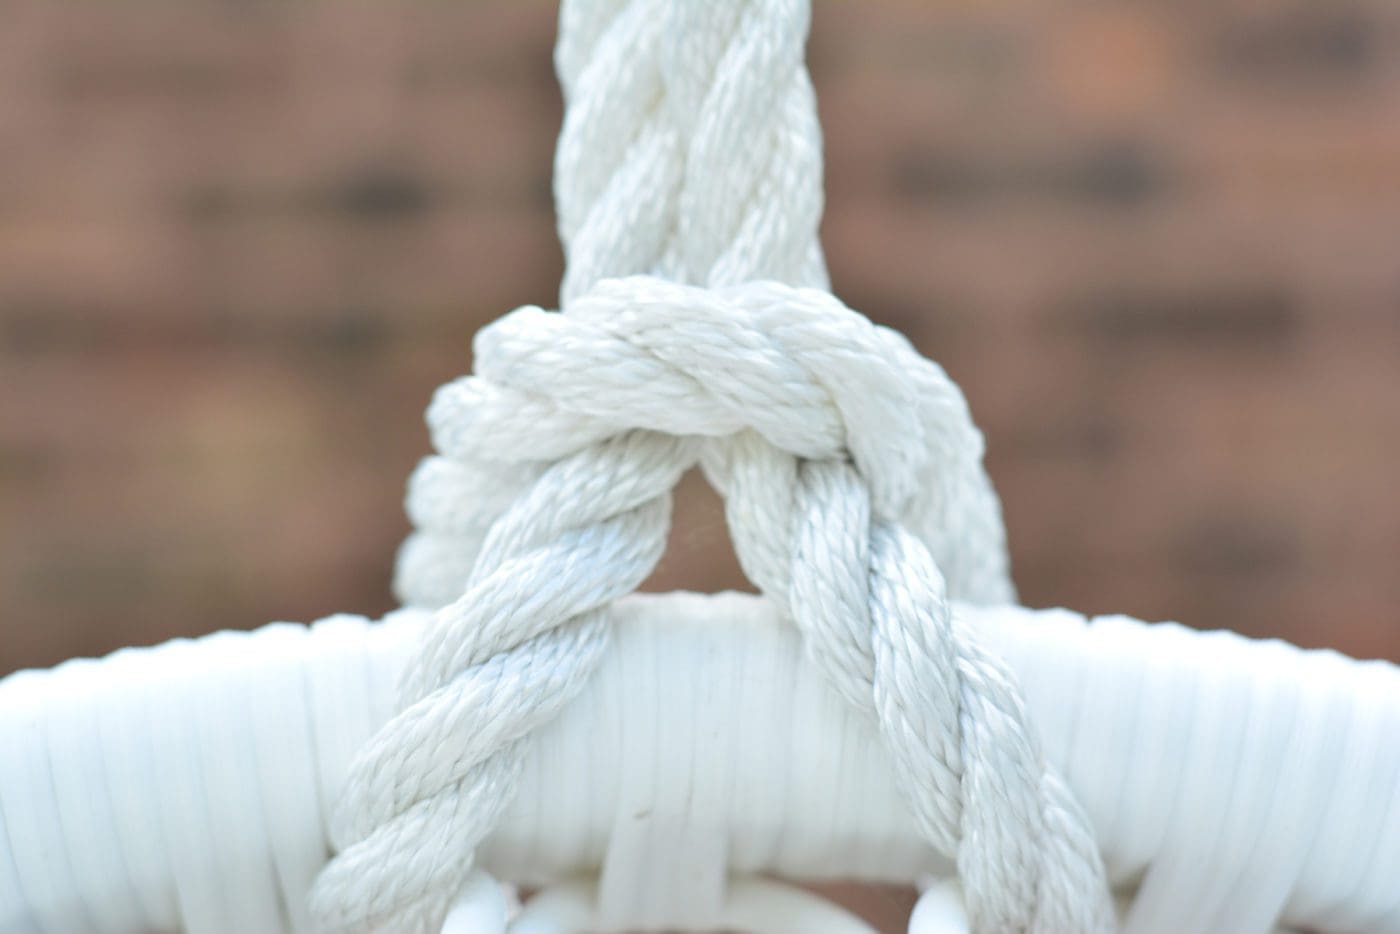 Close up of a white rope tied to a hanging chair.